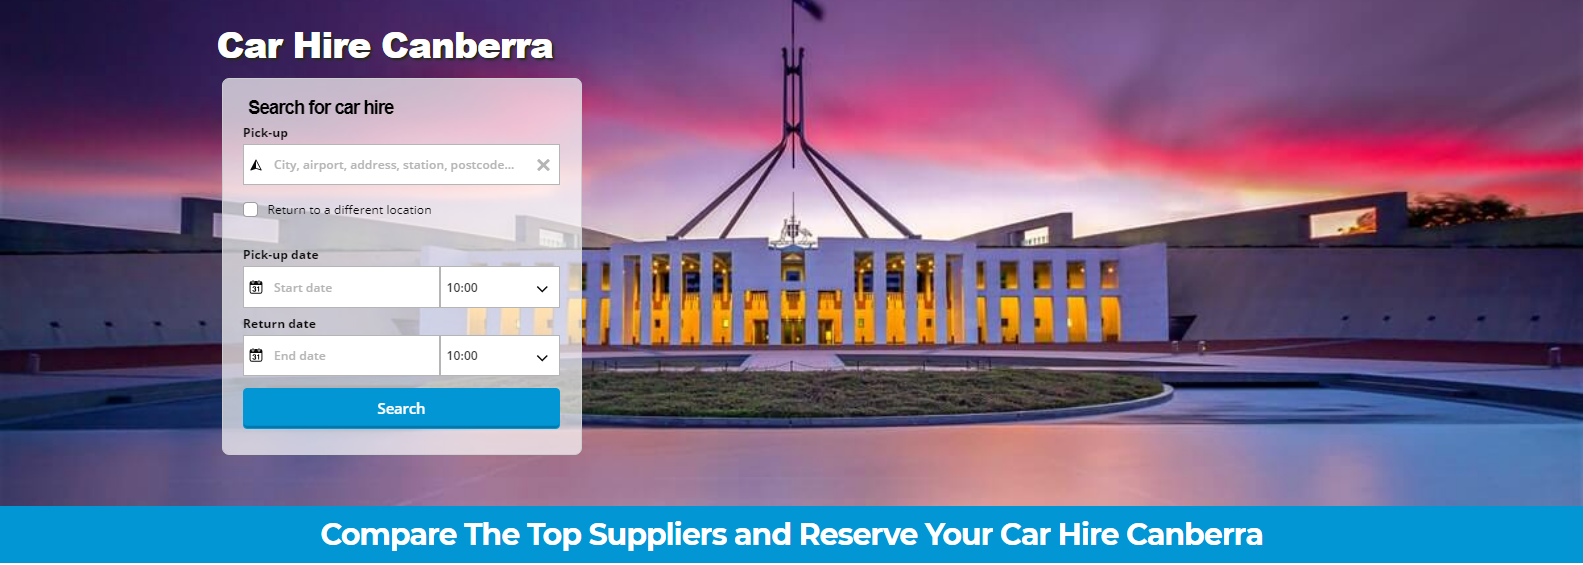 Car Hire Canberra airport